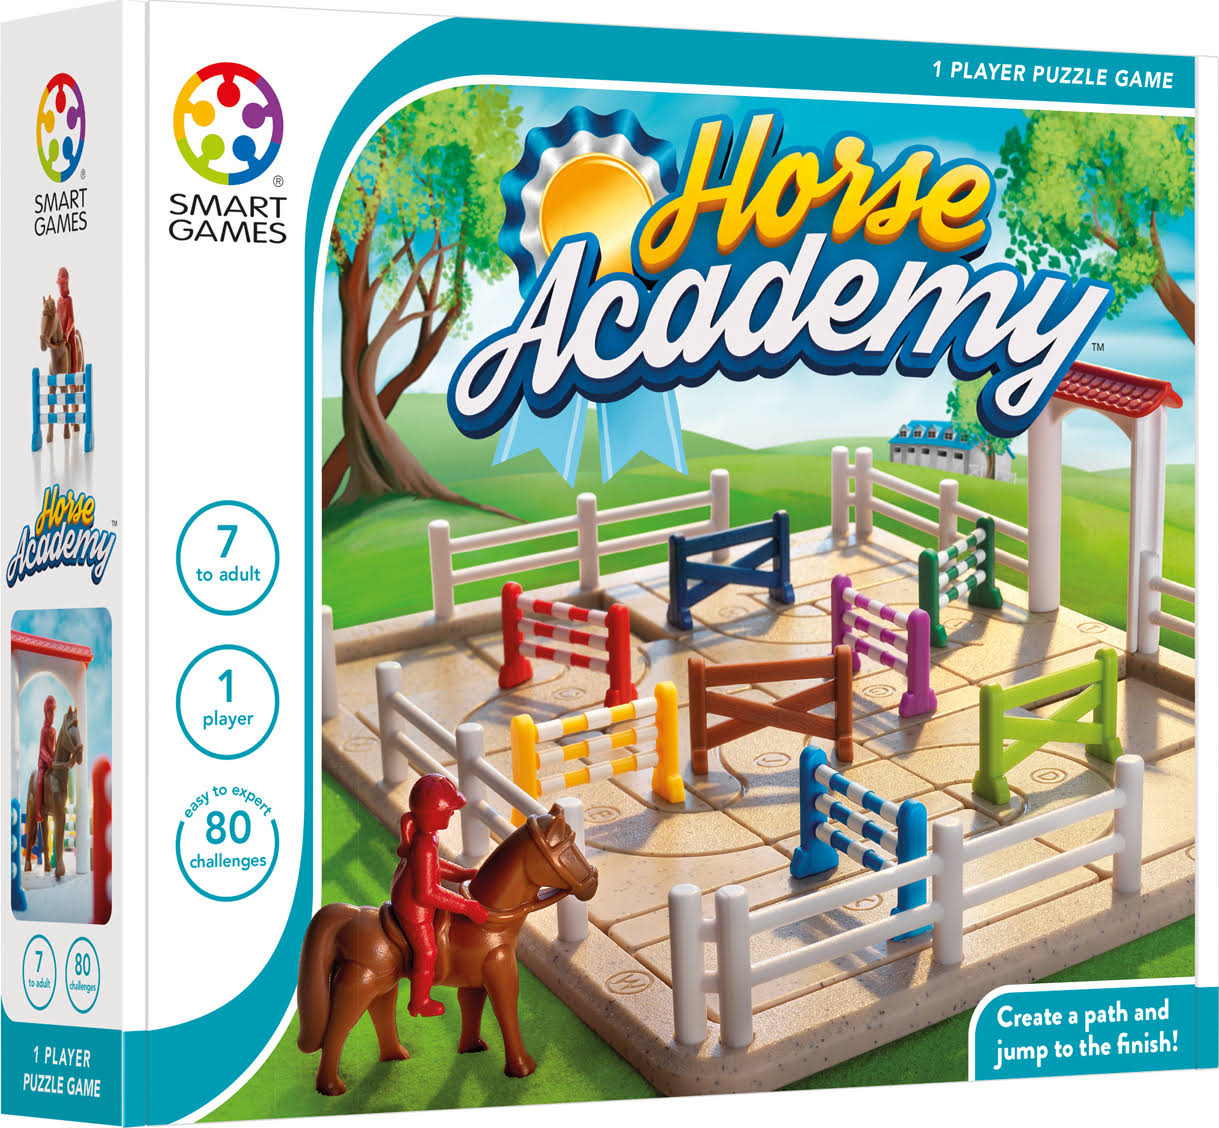 SmartGames Horse Academy Path Building Game with 80 Challenges For Ages 7 to Adult